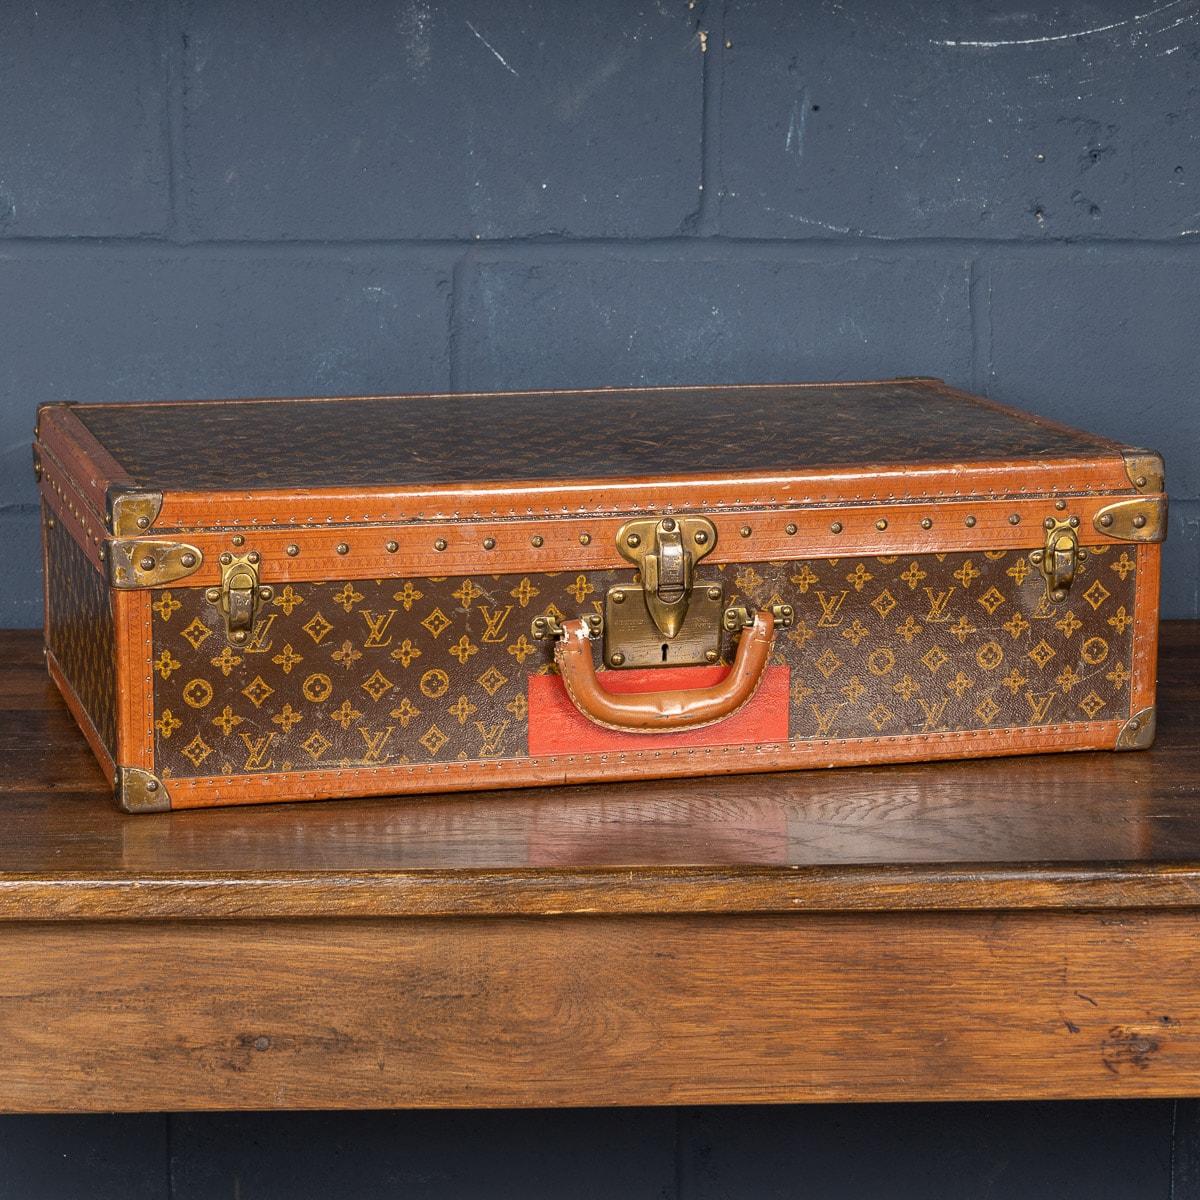 A charming Louis Vuitton hard-sided case, mid 20th century, the exterior finished in the famous monogram canvas with brass fittings. A great piece for use today or as an item for the home.

CONDITION
In overall fair vintage condition, handle